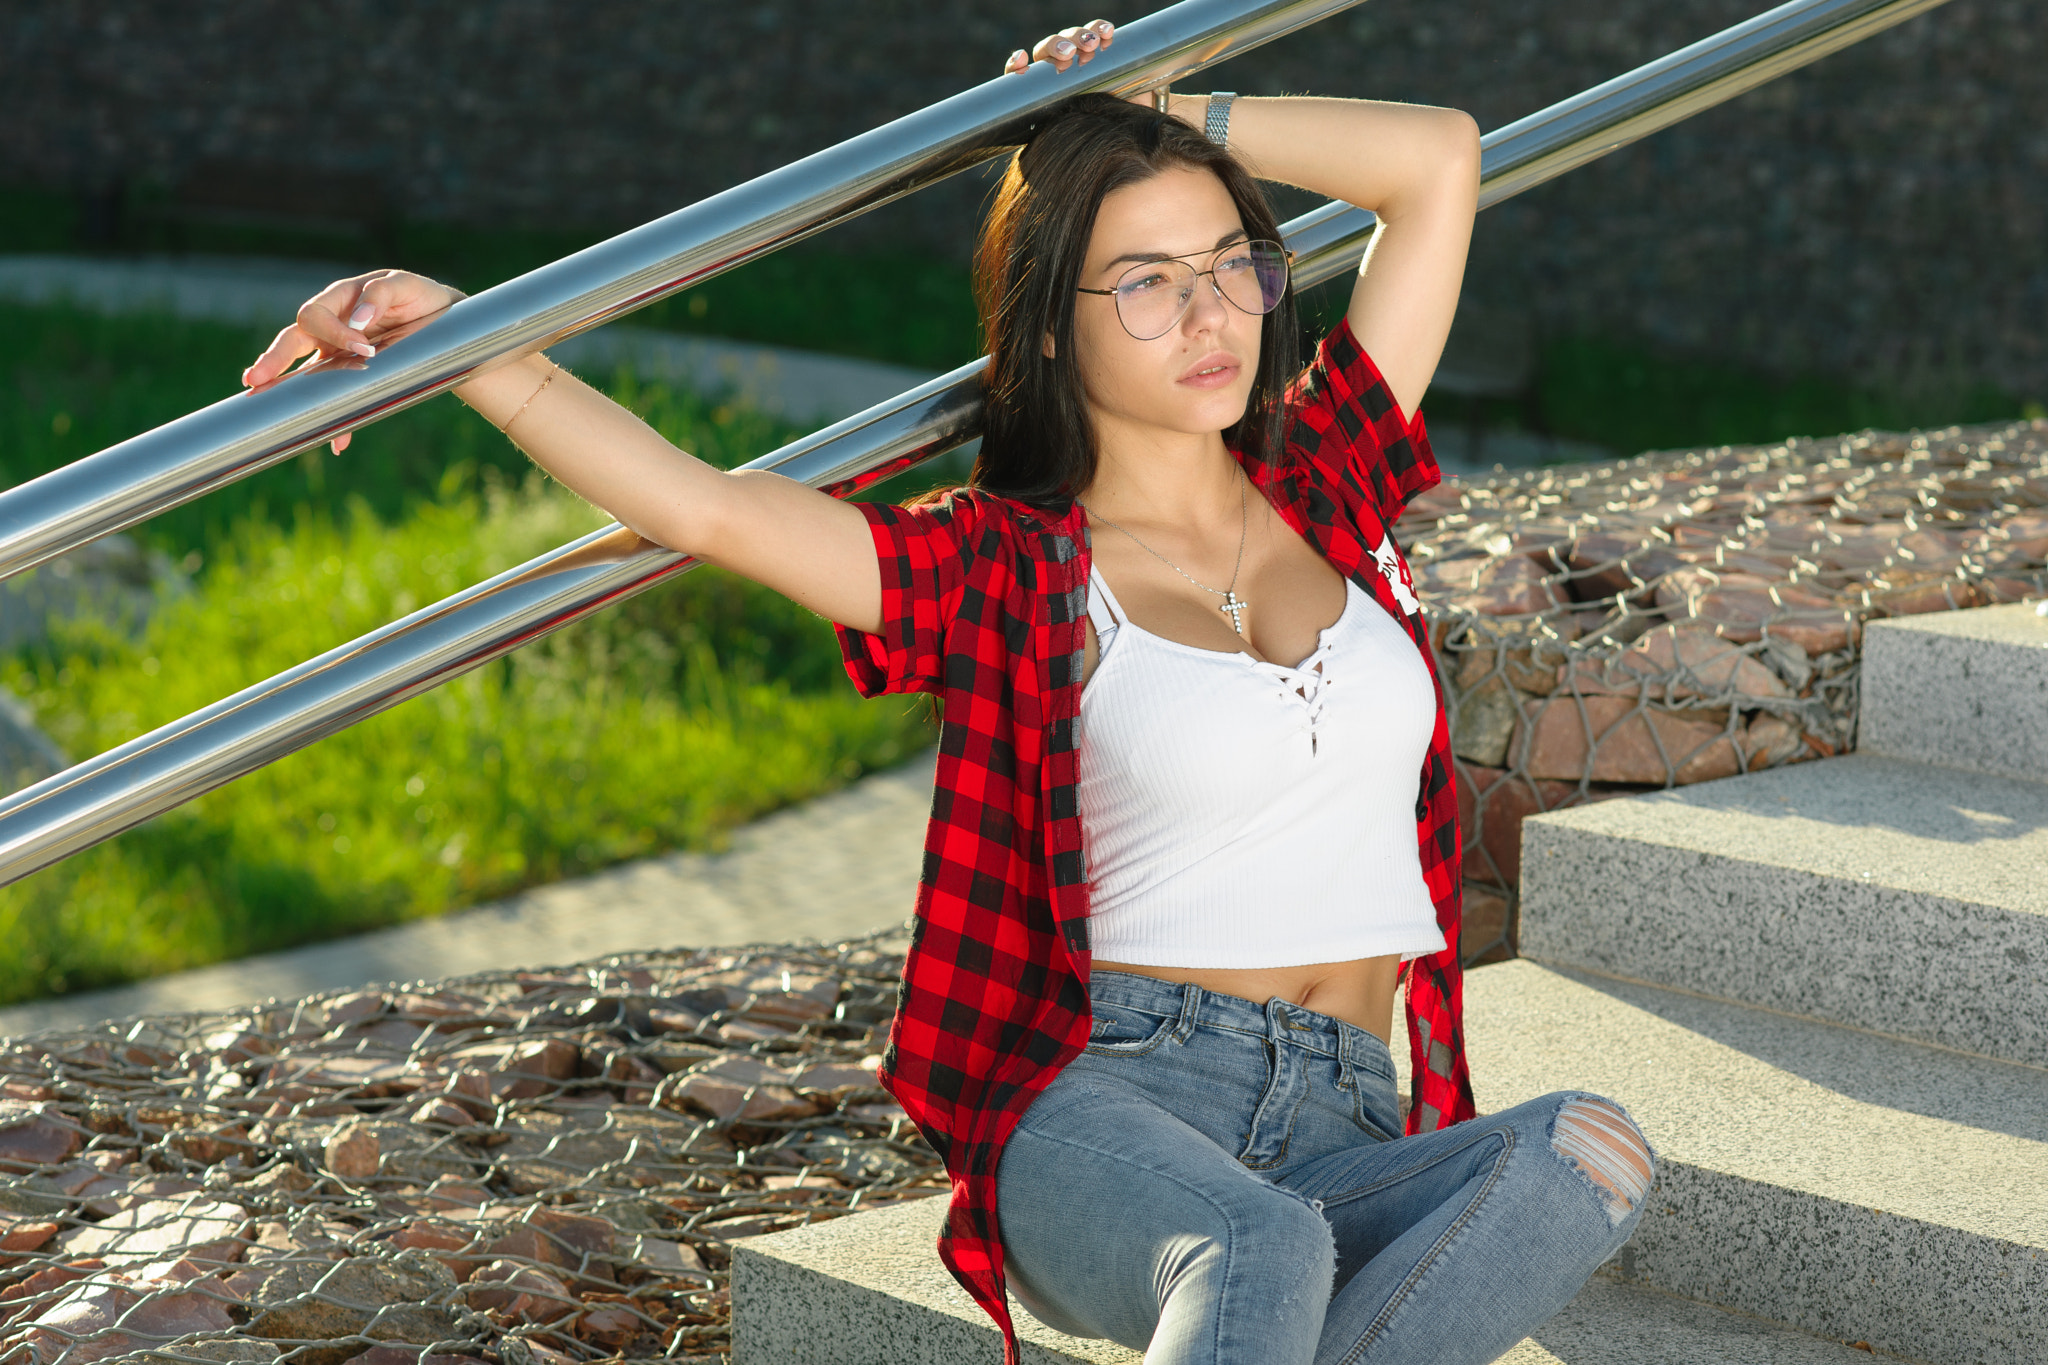 Women Portrait Plaid Shirt Torn Jeans Stairs Sitting Women With Glasses Marina Shimkovich 2048x1365